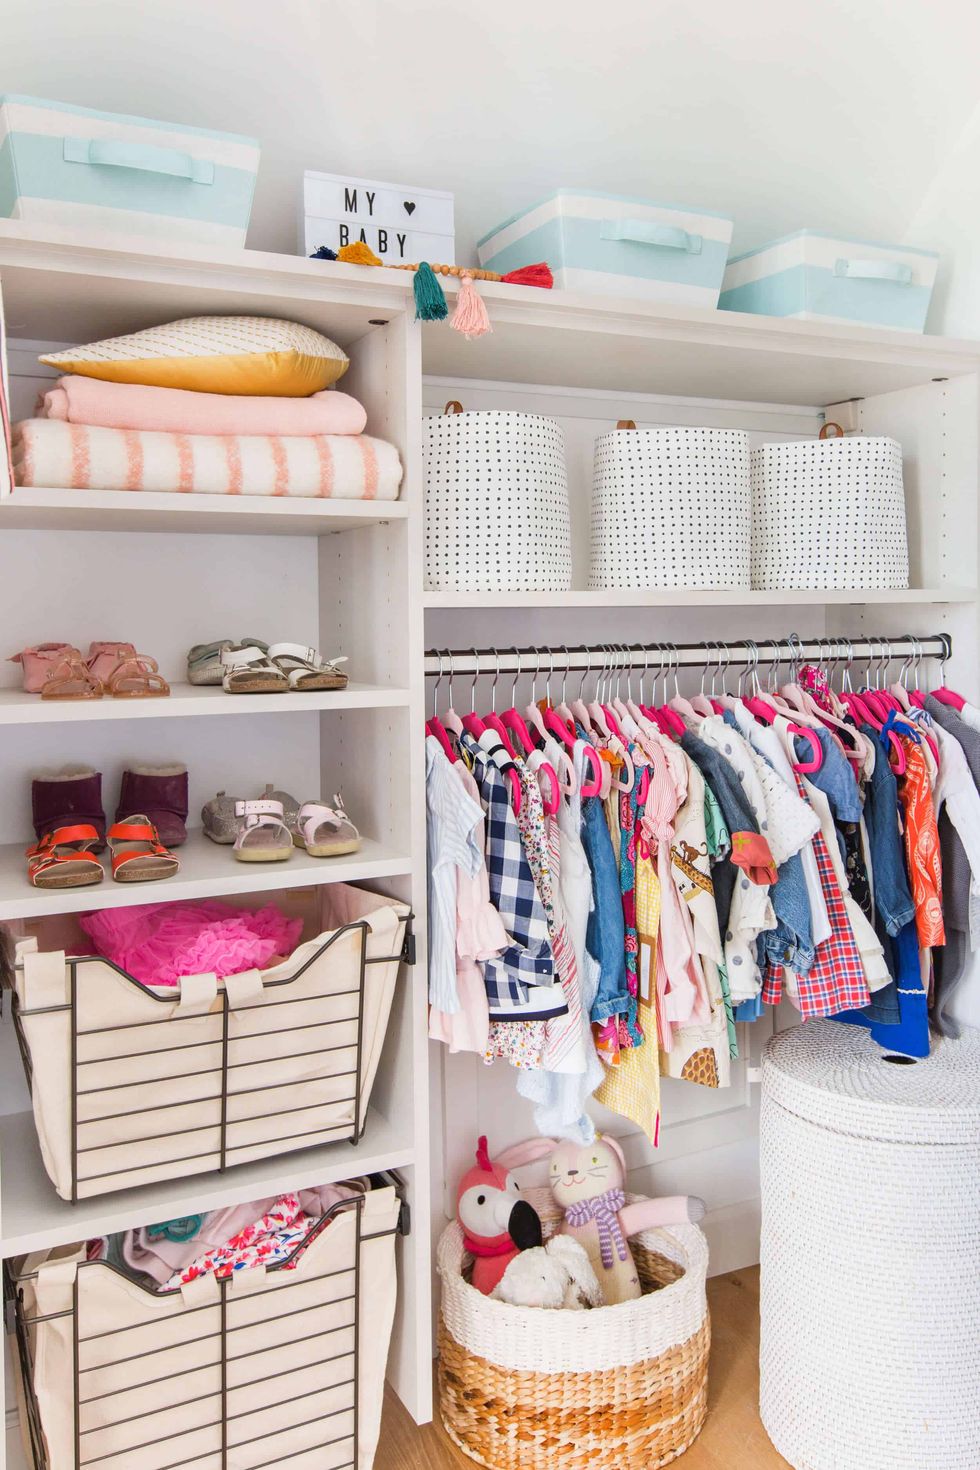 10 Ways to Make Your Kids' Closet More Than Just a White Box